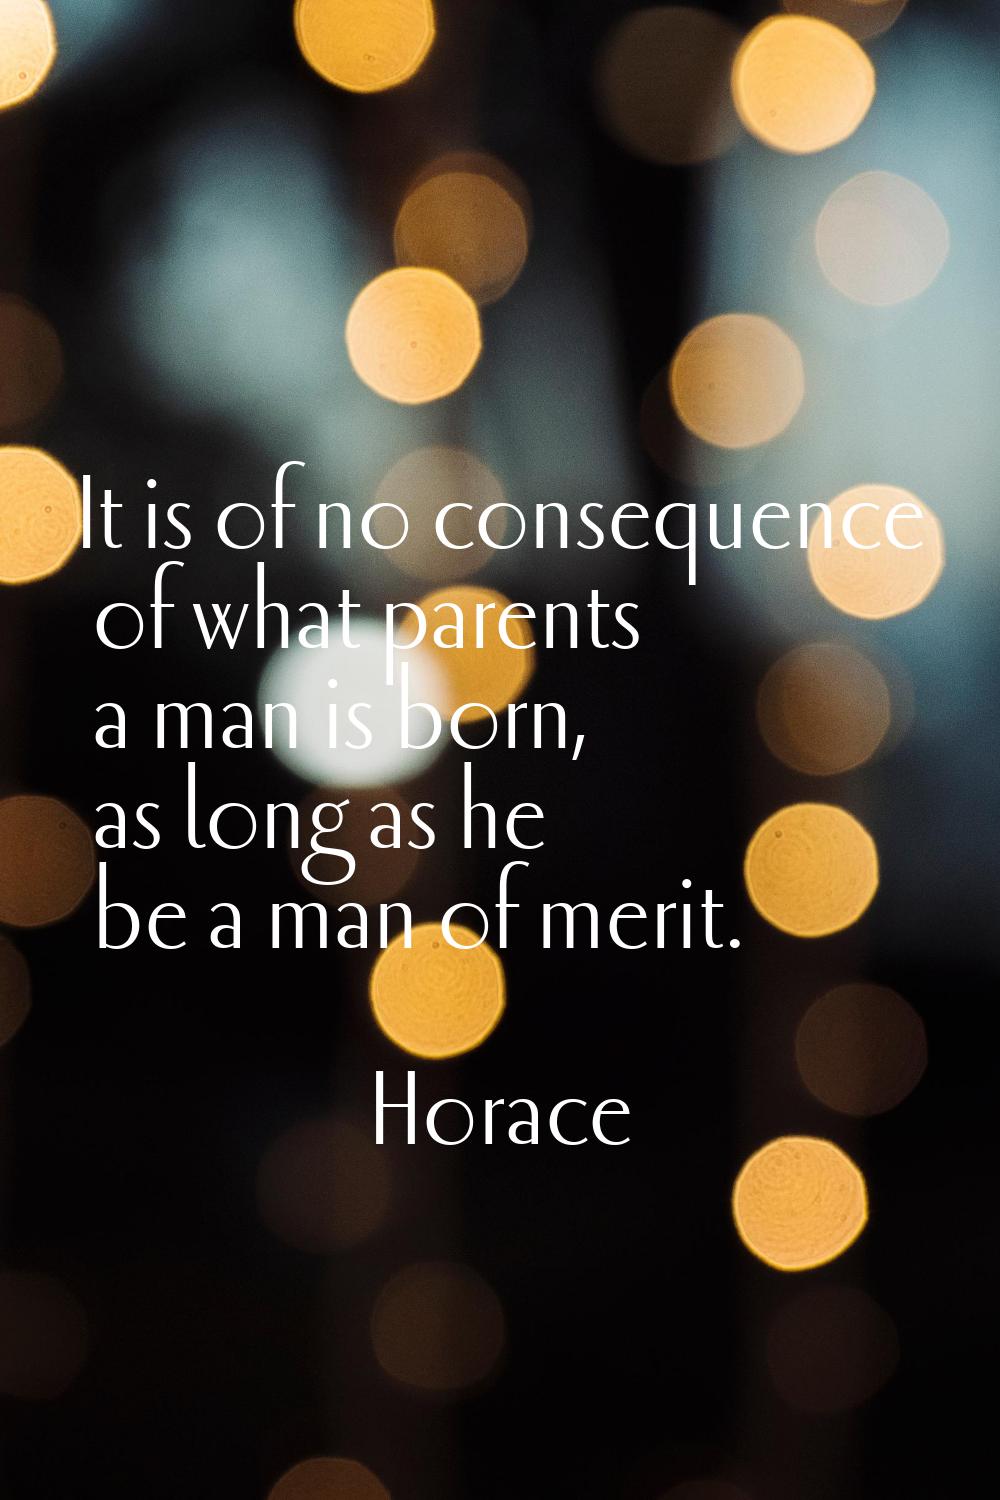 It is of no consequence of what parents a man is born, as long as he be a man of merit.